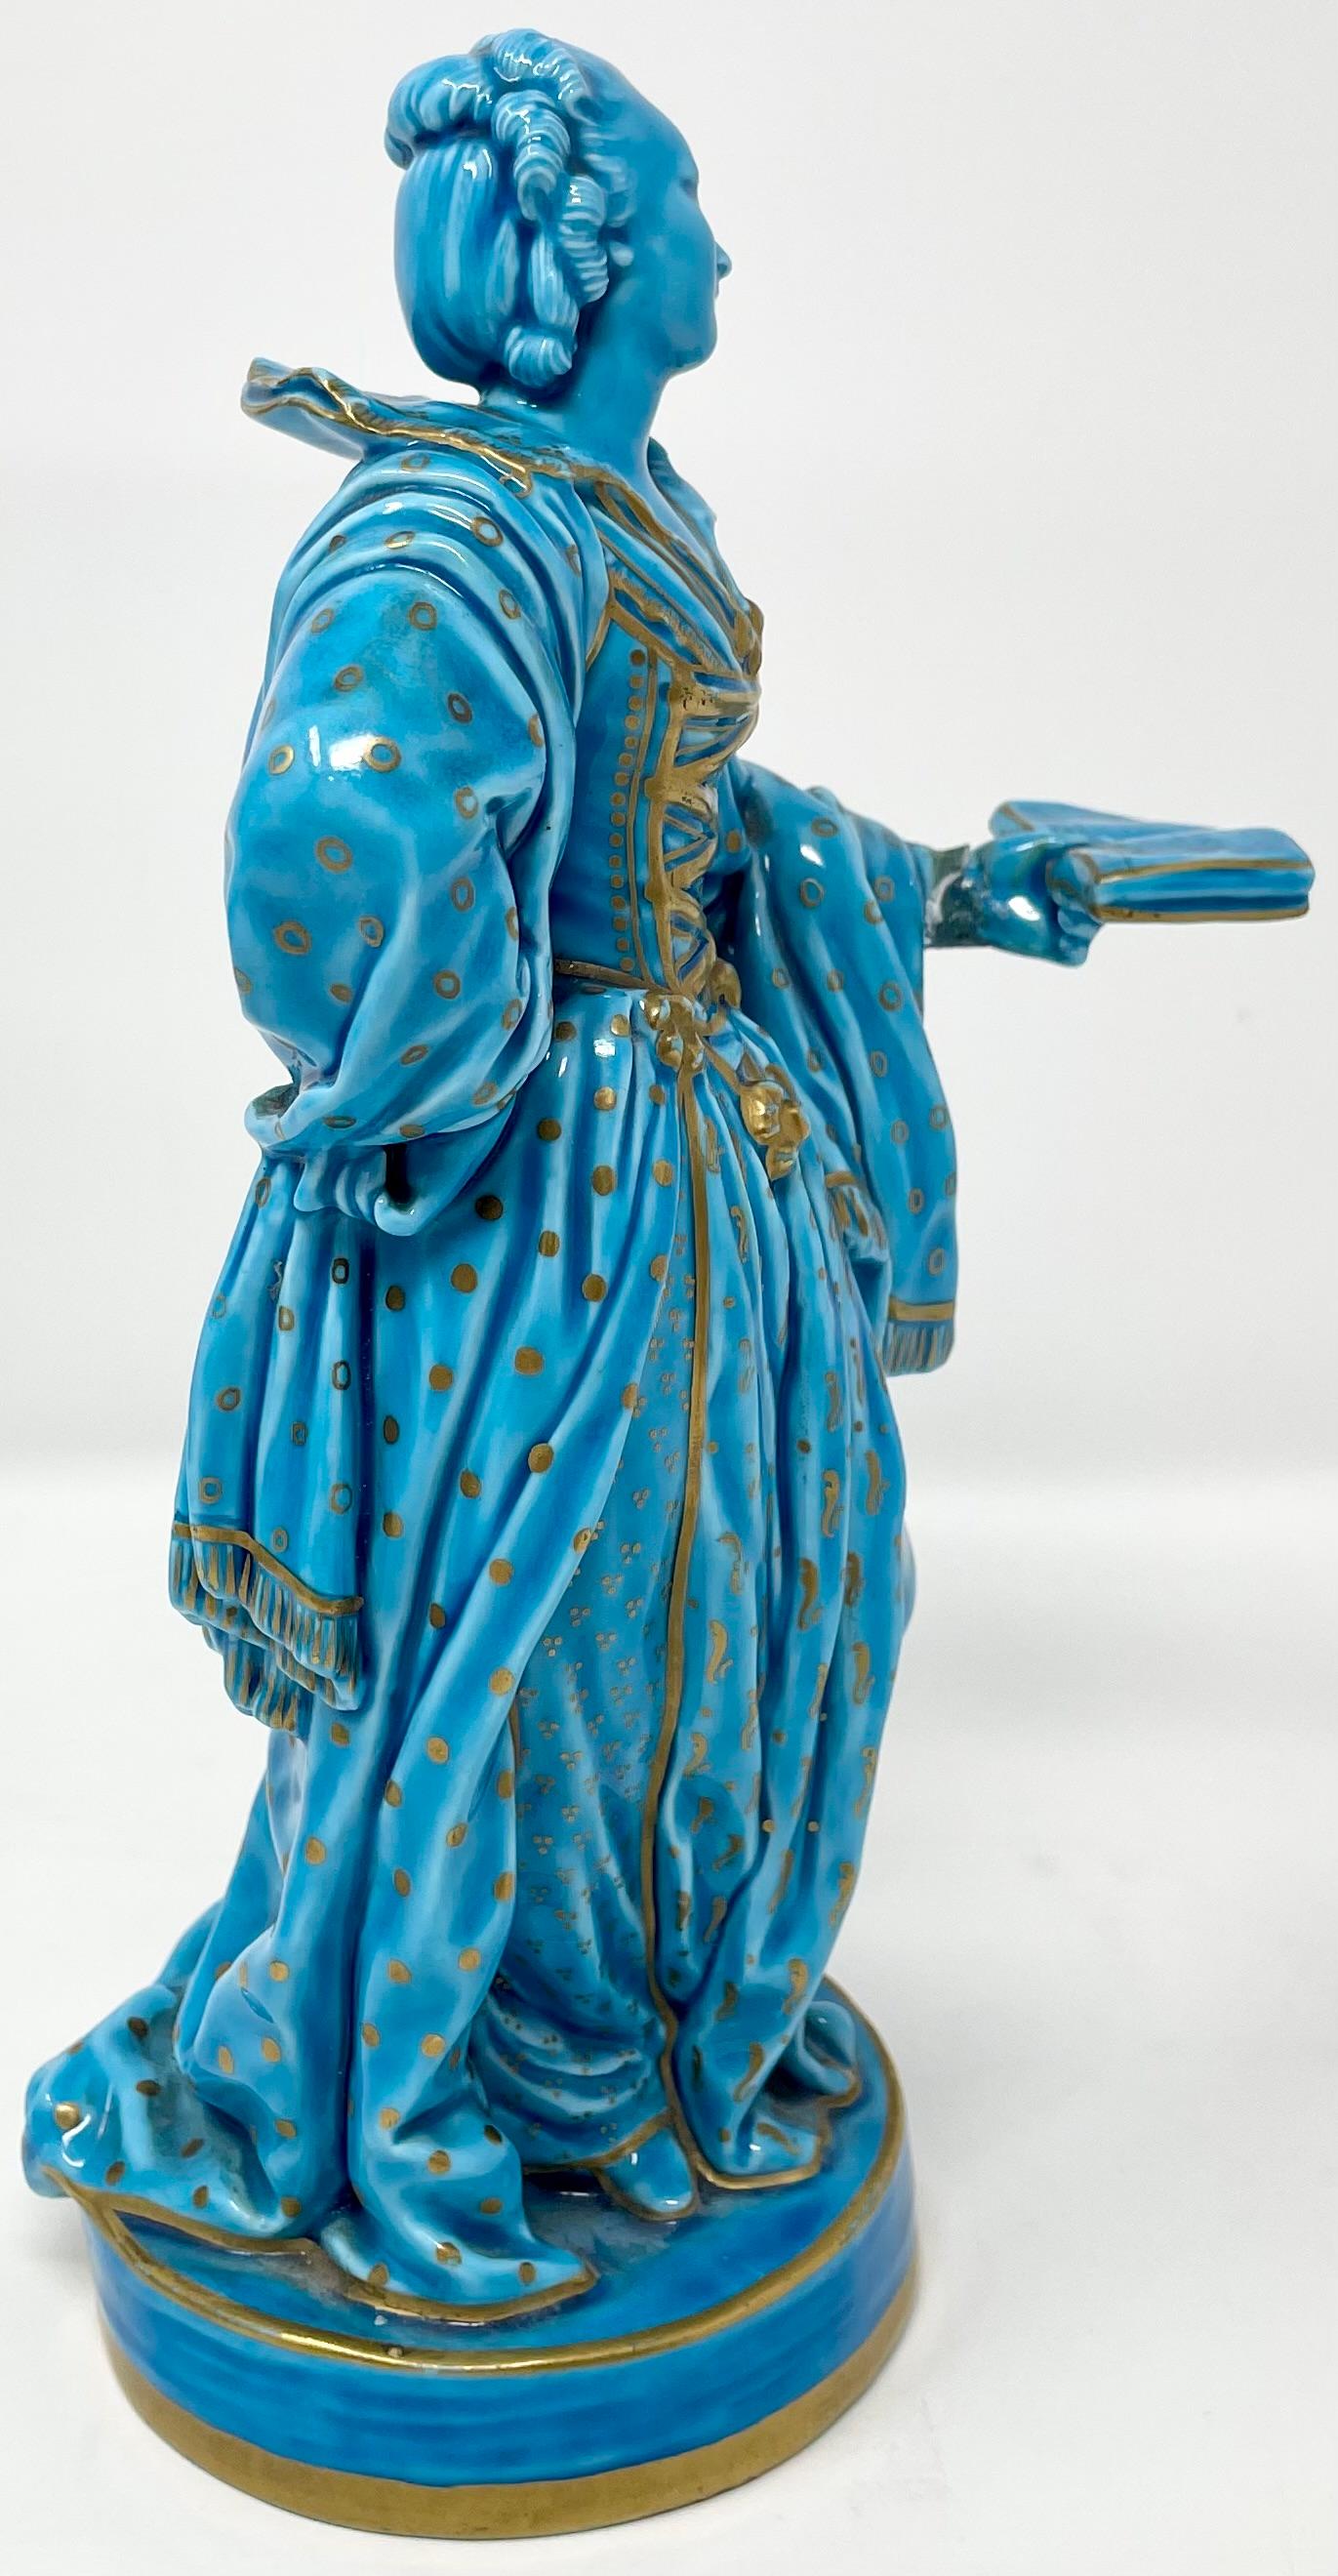 Set of 4 Antique French Porcelain Turquoise & Gold Table Figurines, Circa 1880. For Sale 14